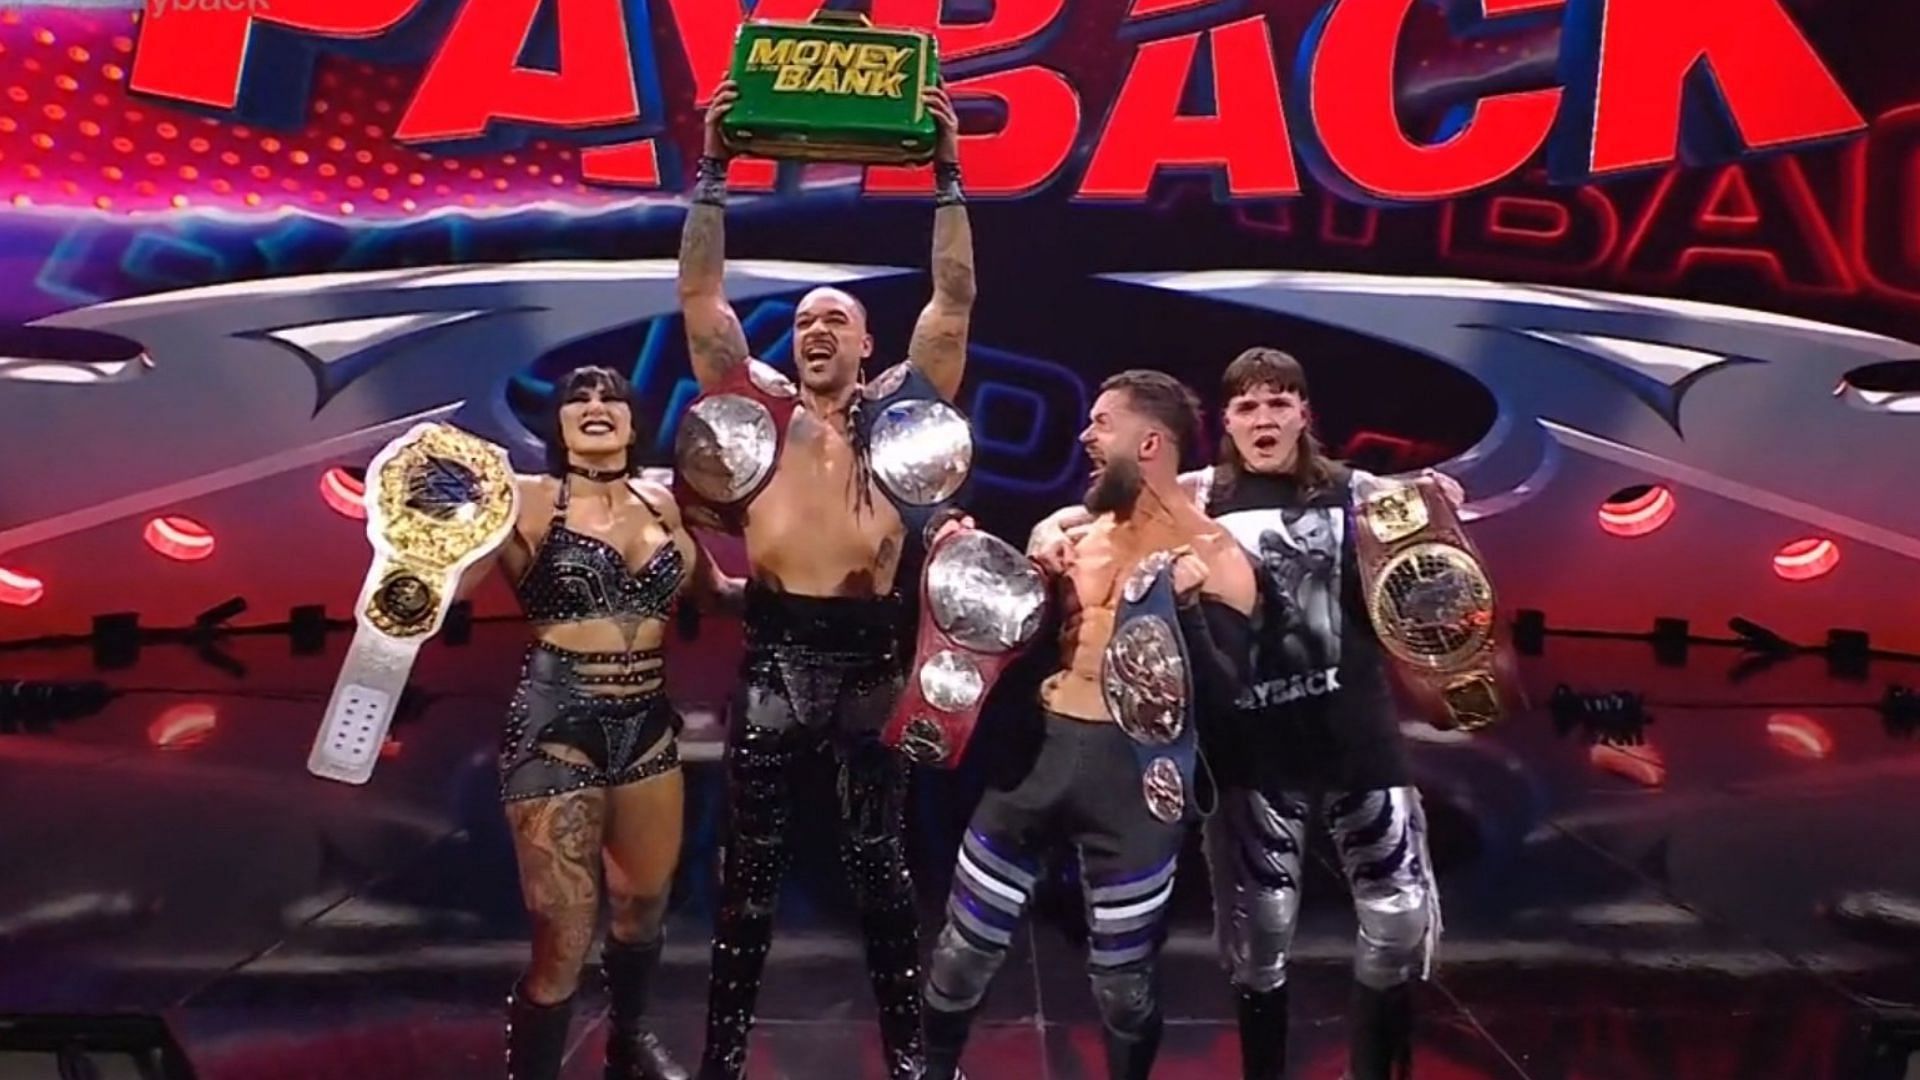 The Judgment Day's Tag Team Title win has affected WWE show